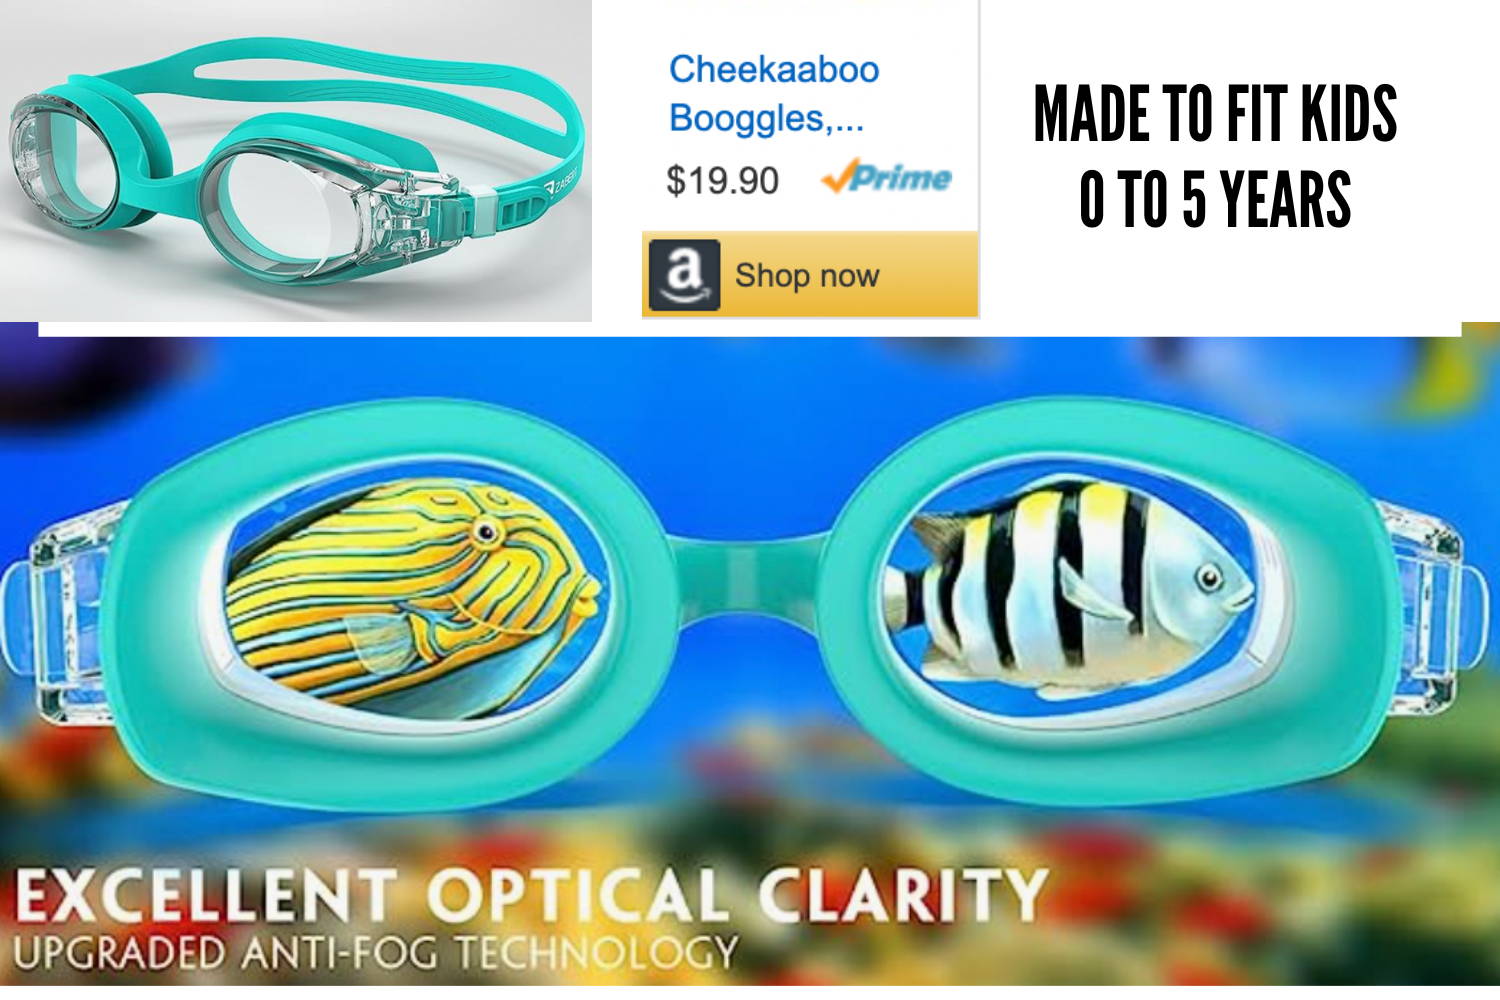 swim goggles for little kids and babies